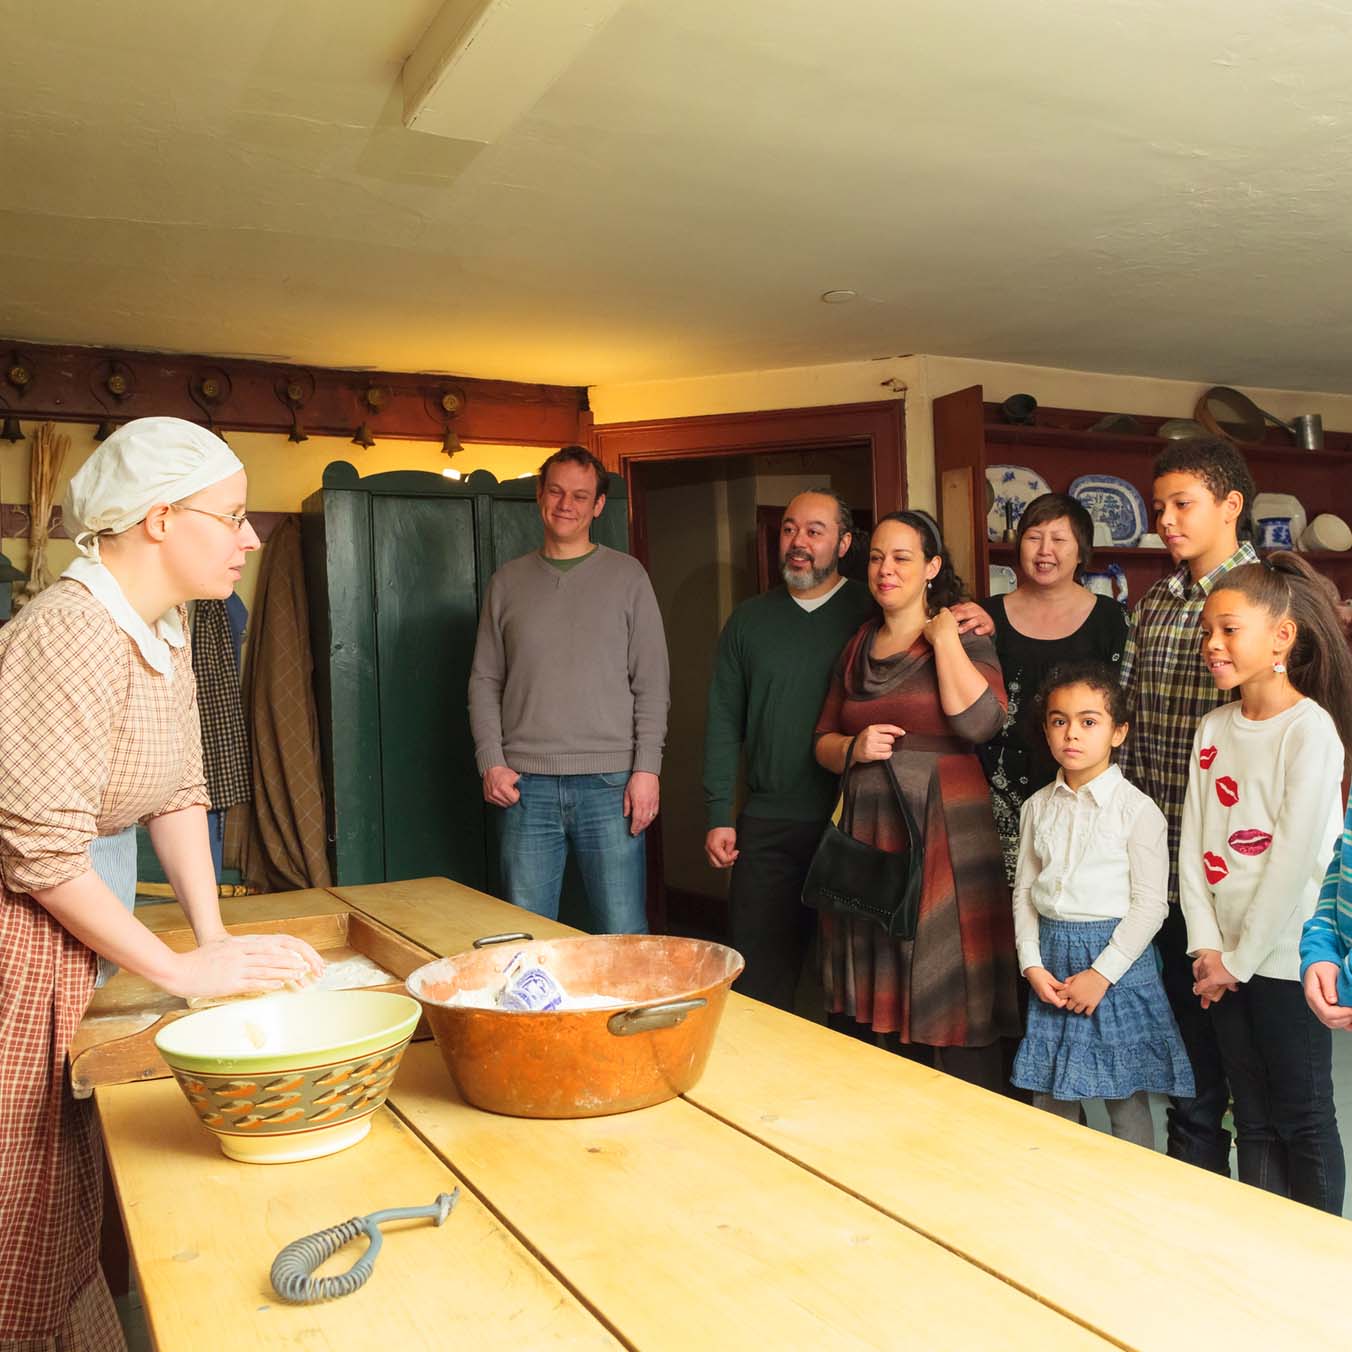 Tour of Dundurn kitchen with cook in period attire